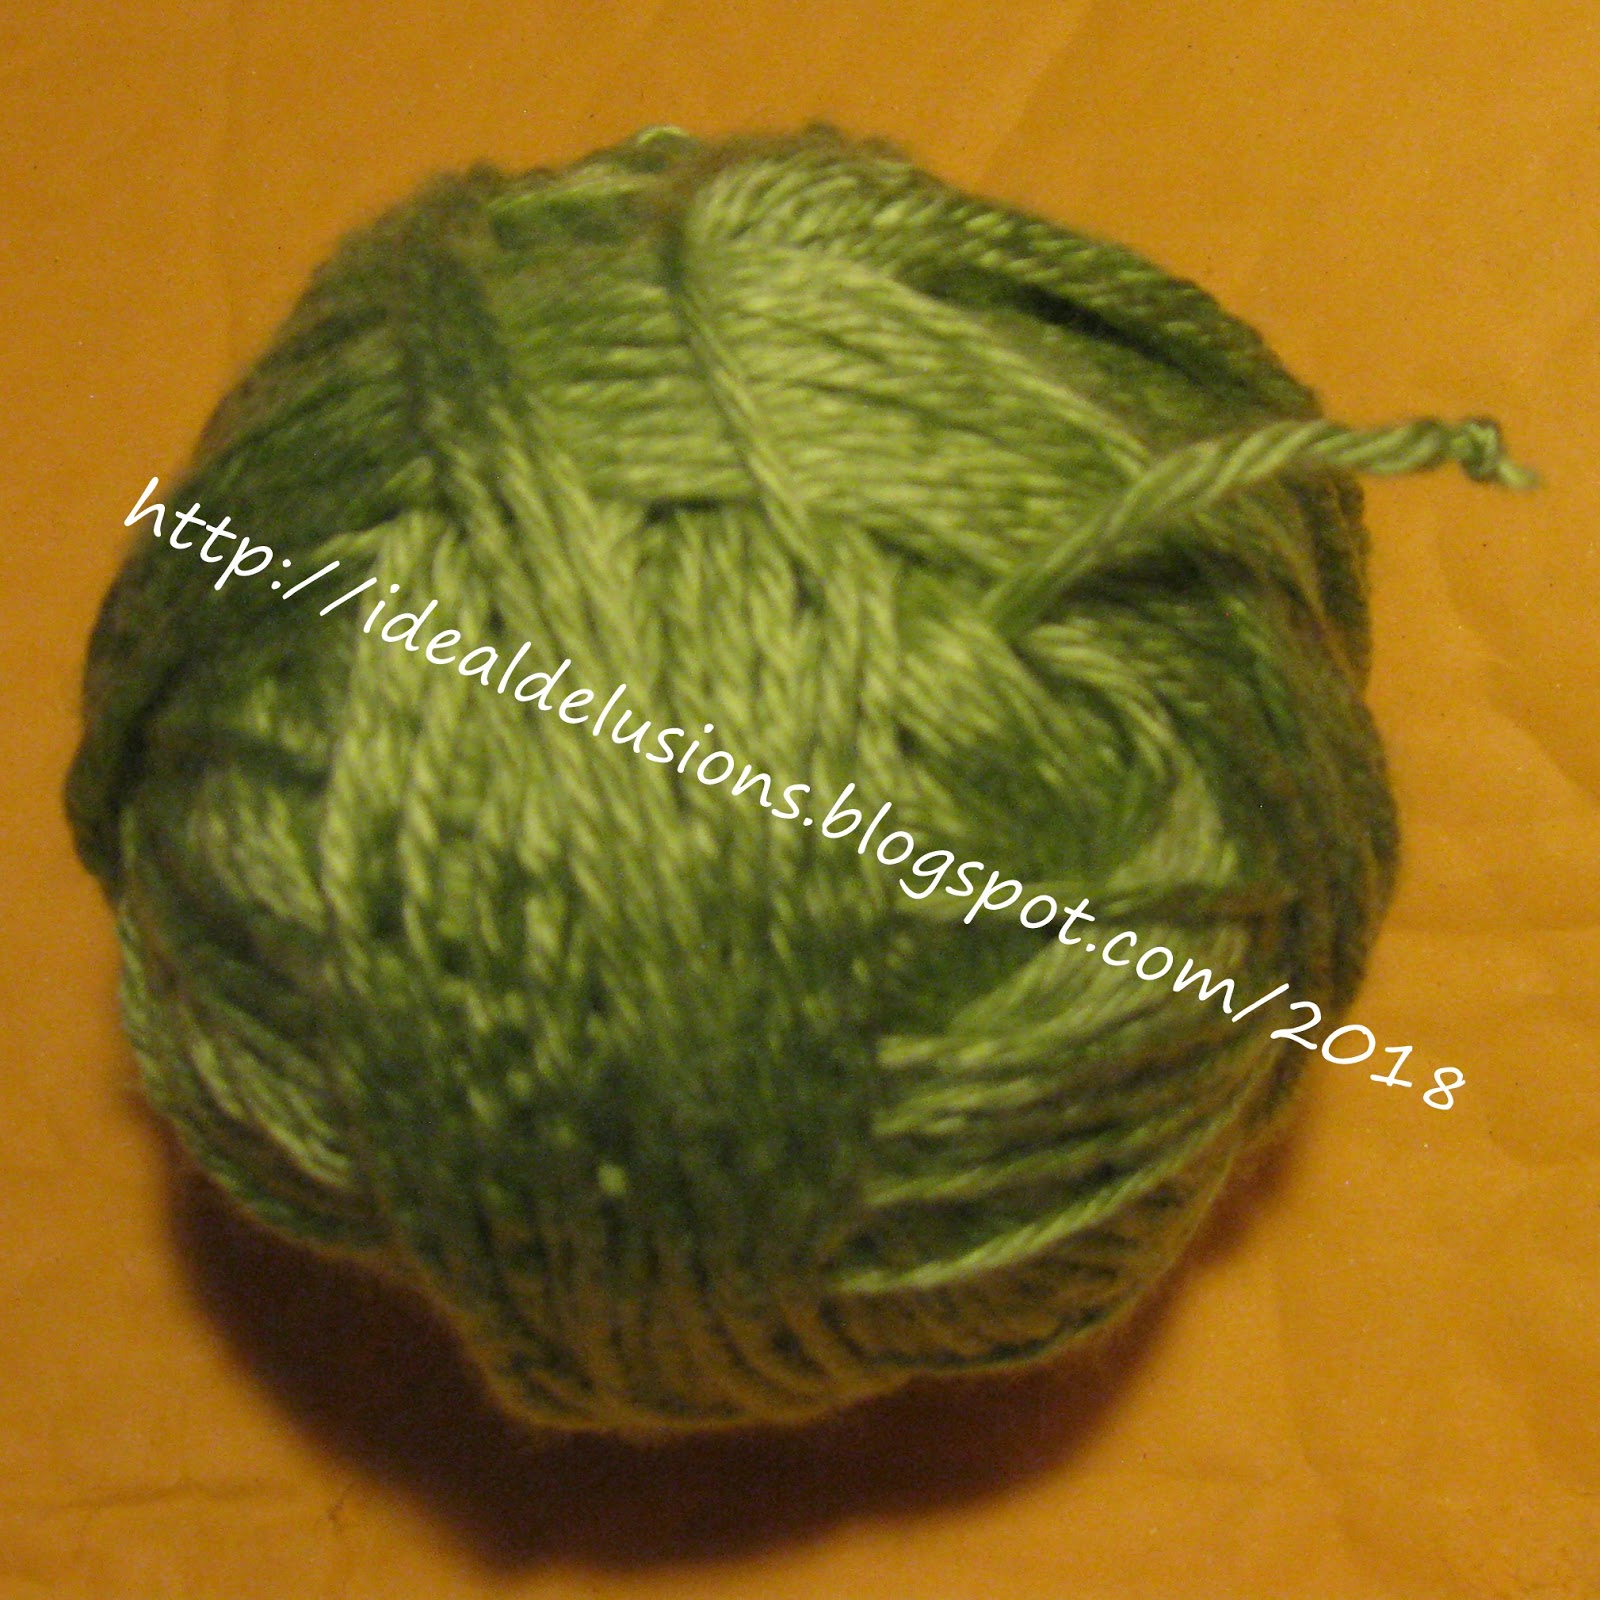 Ideal Delusions: What I Learned About Yarn Winders